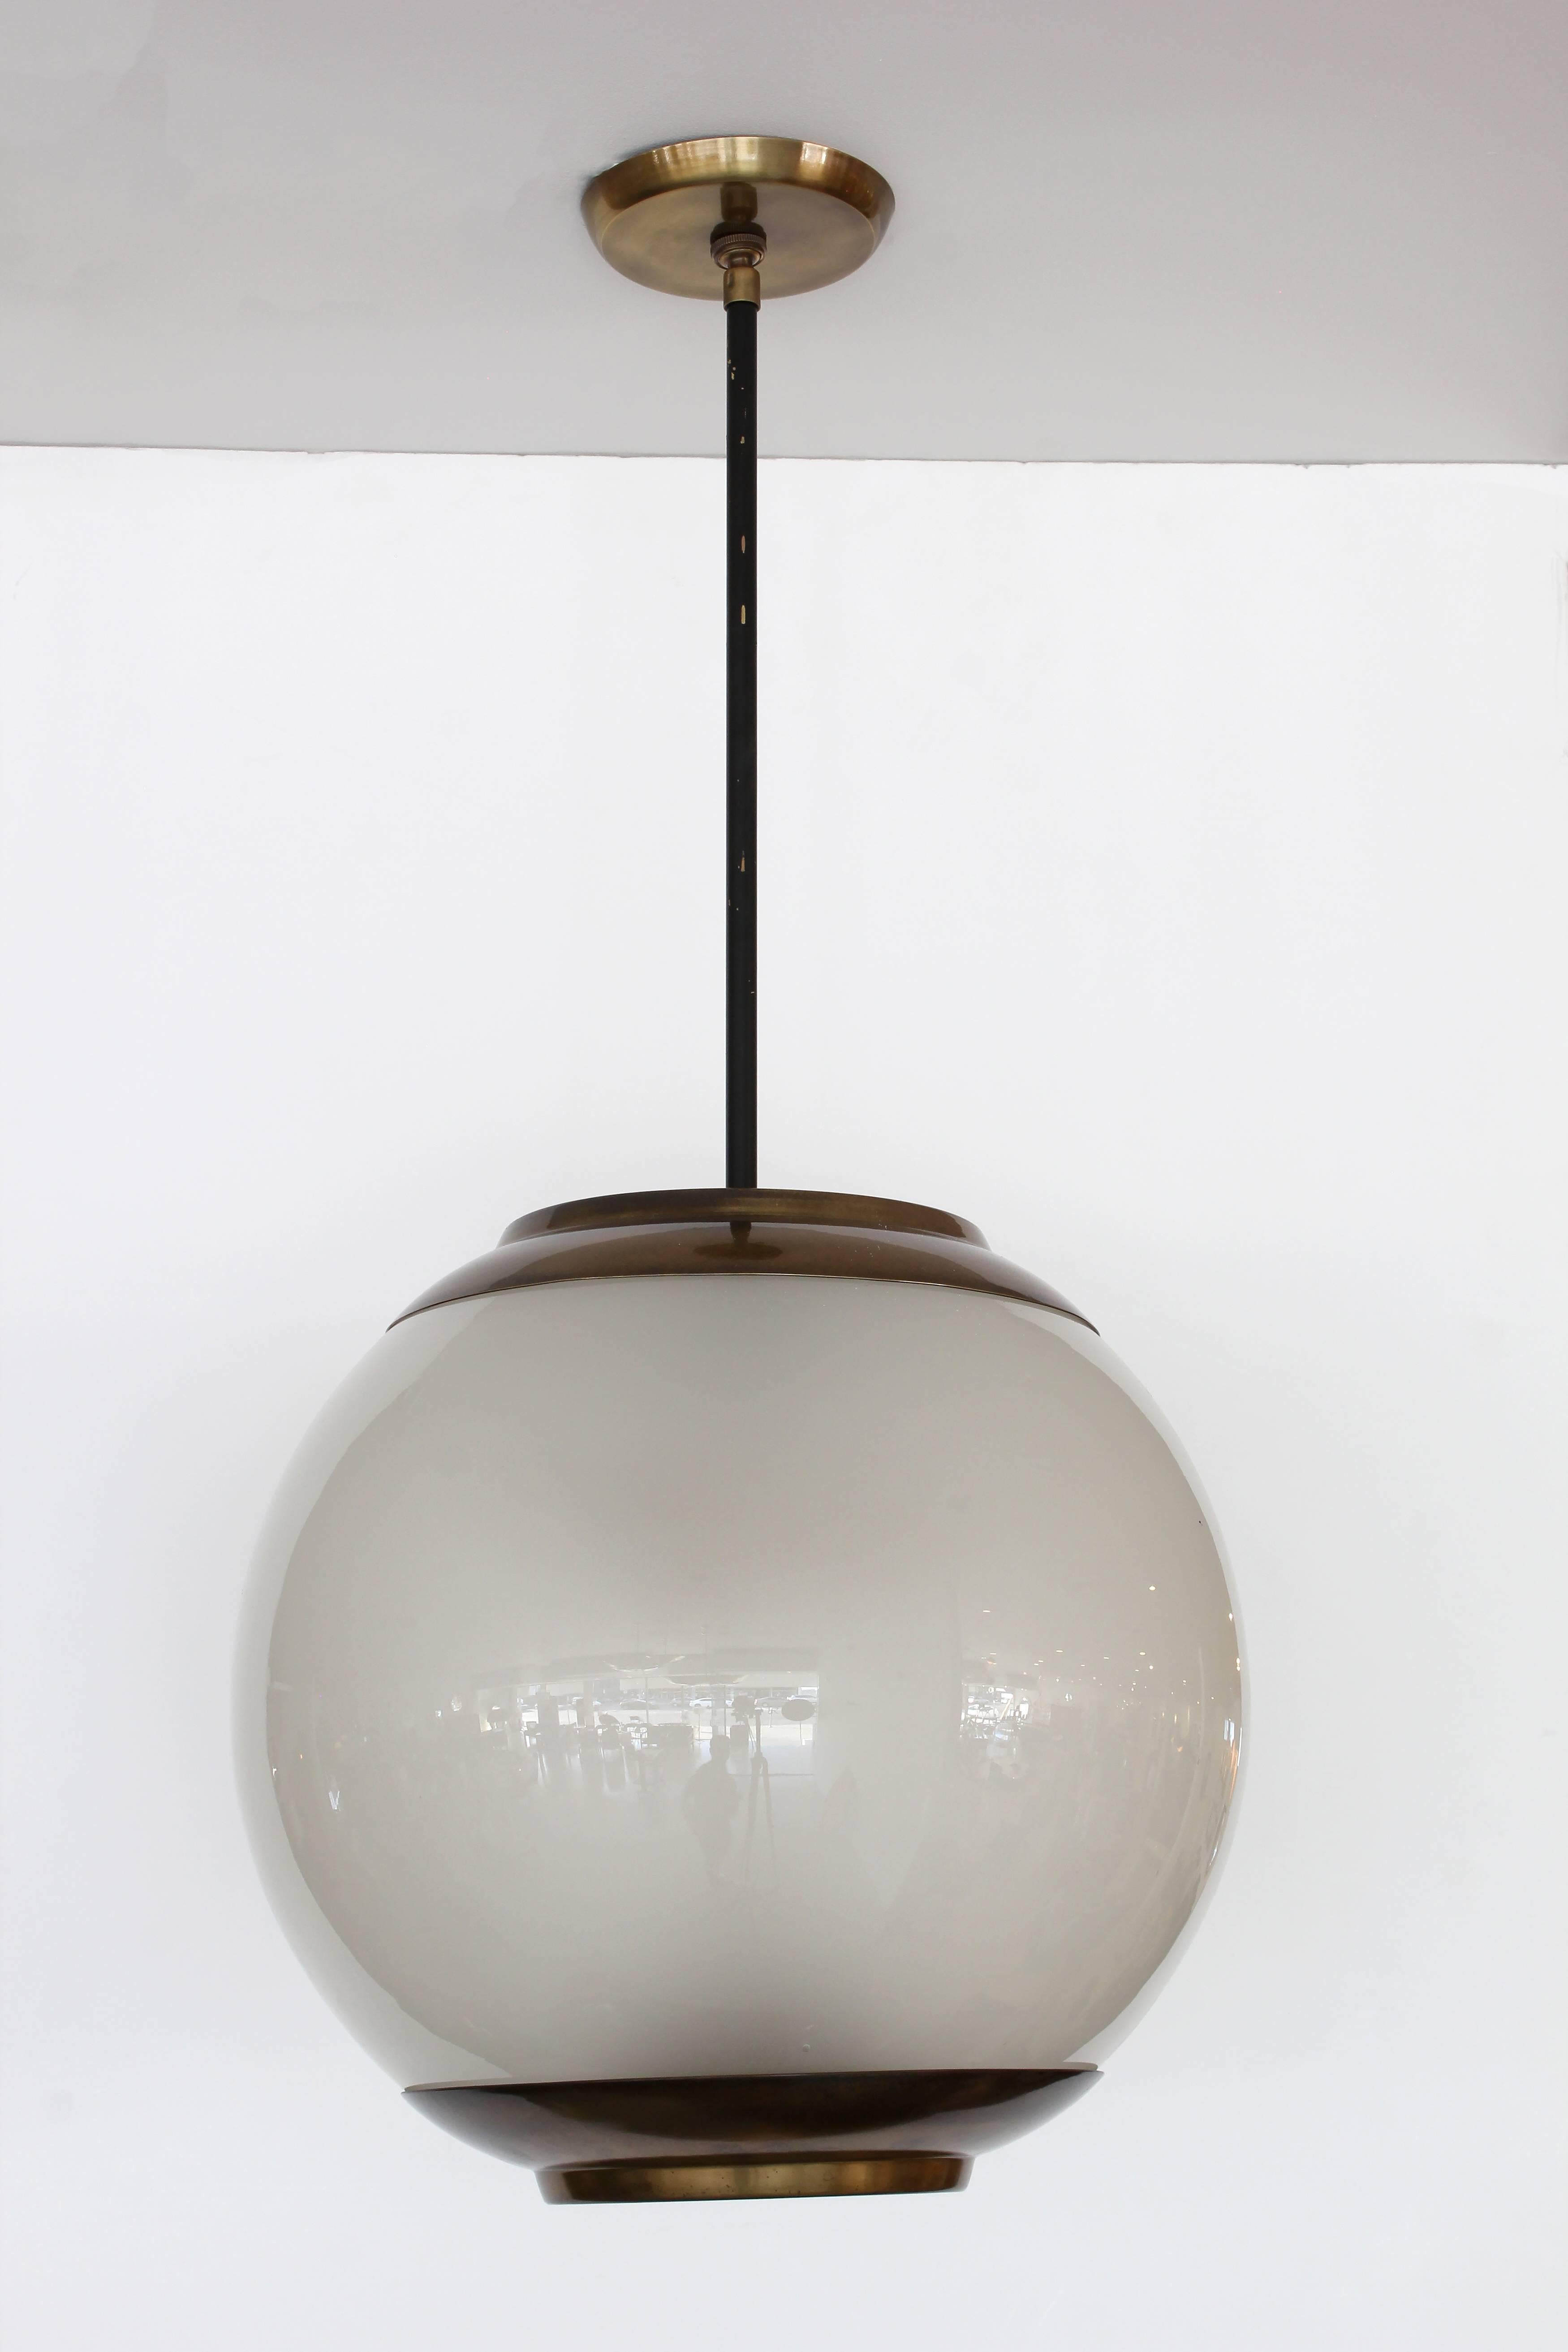 Large-scale Azucena globe pendant by Luigi Caccia Dominioni with beautiful perforated antiqued brass hardware. Globe is beautiful milky glass and large in scale. Newly rewired.